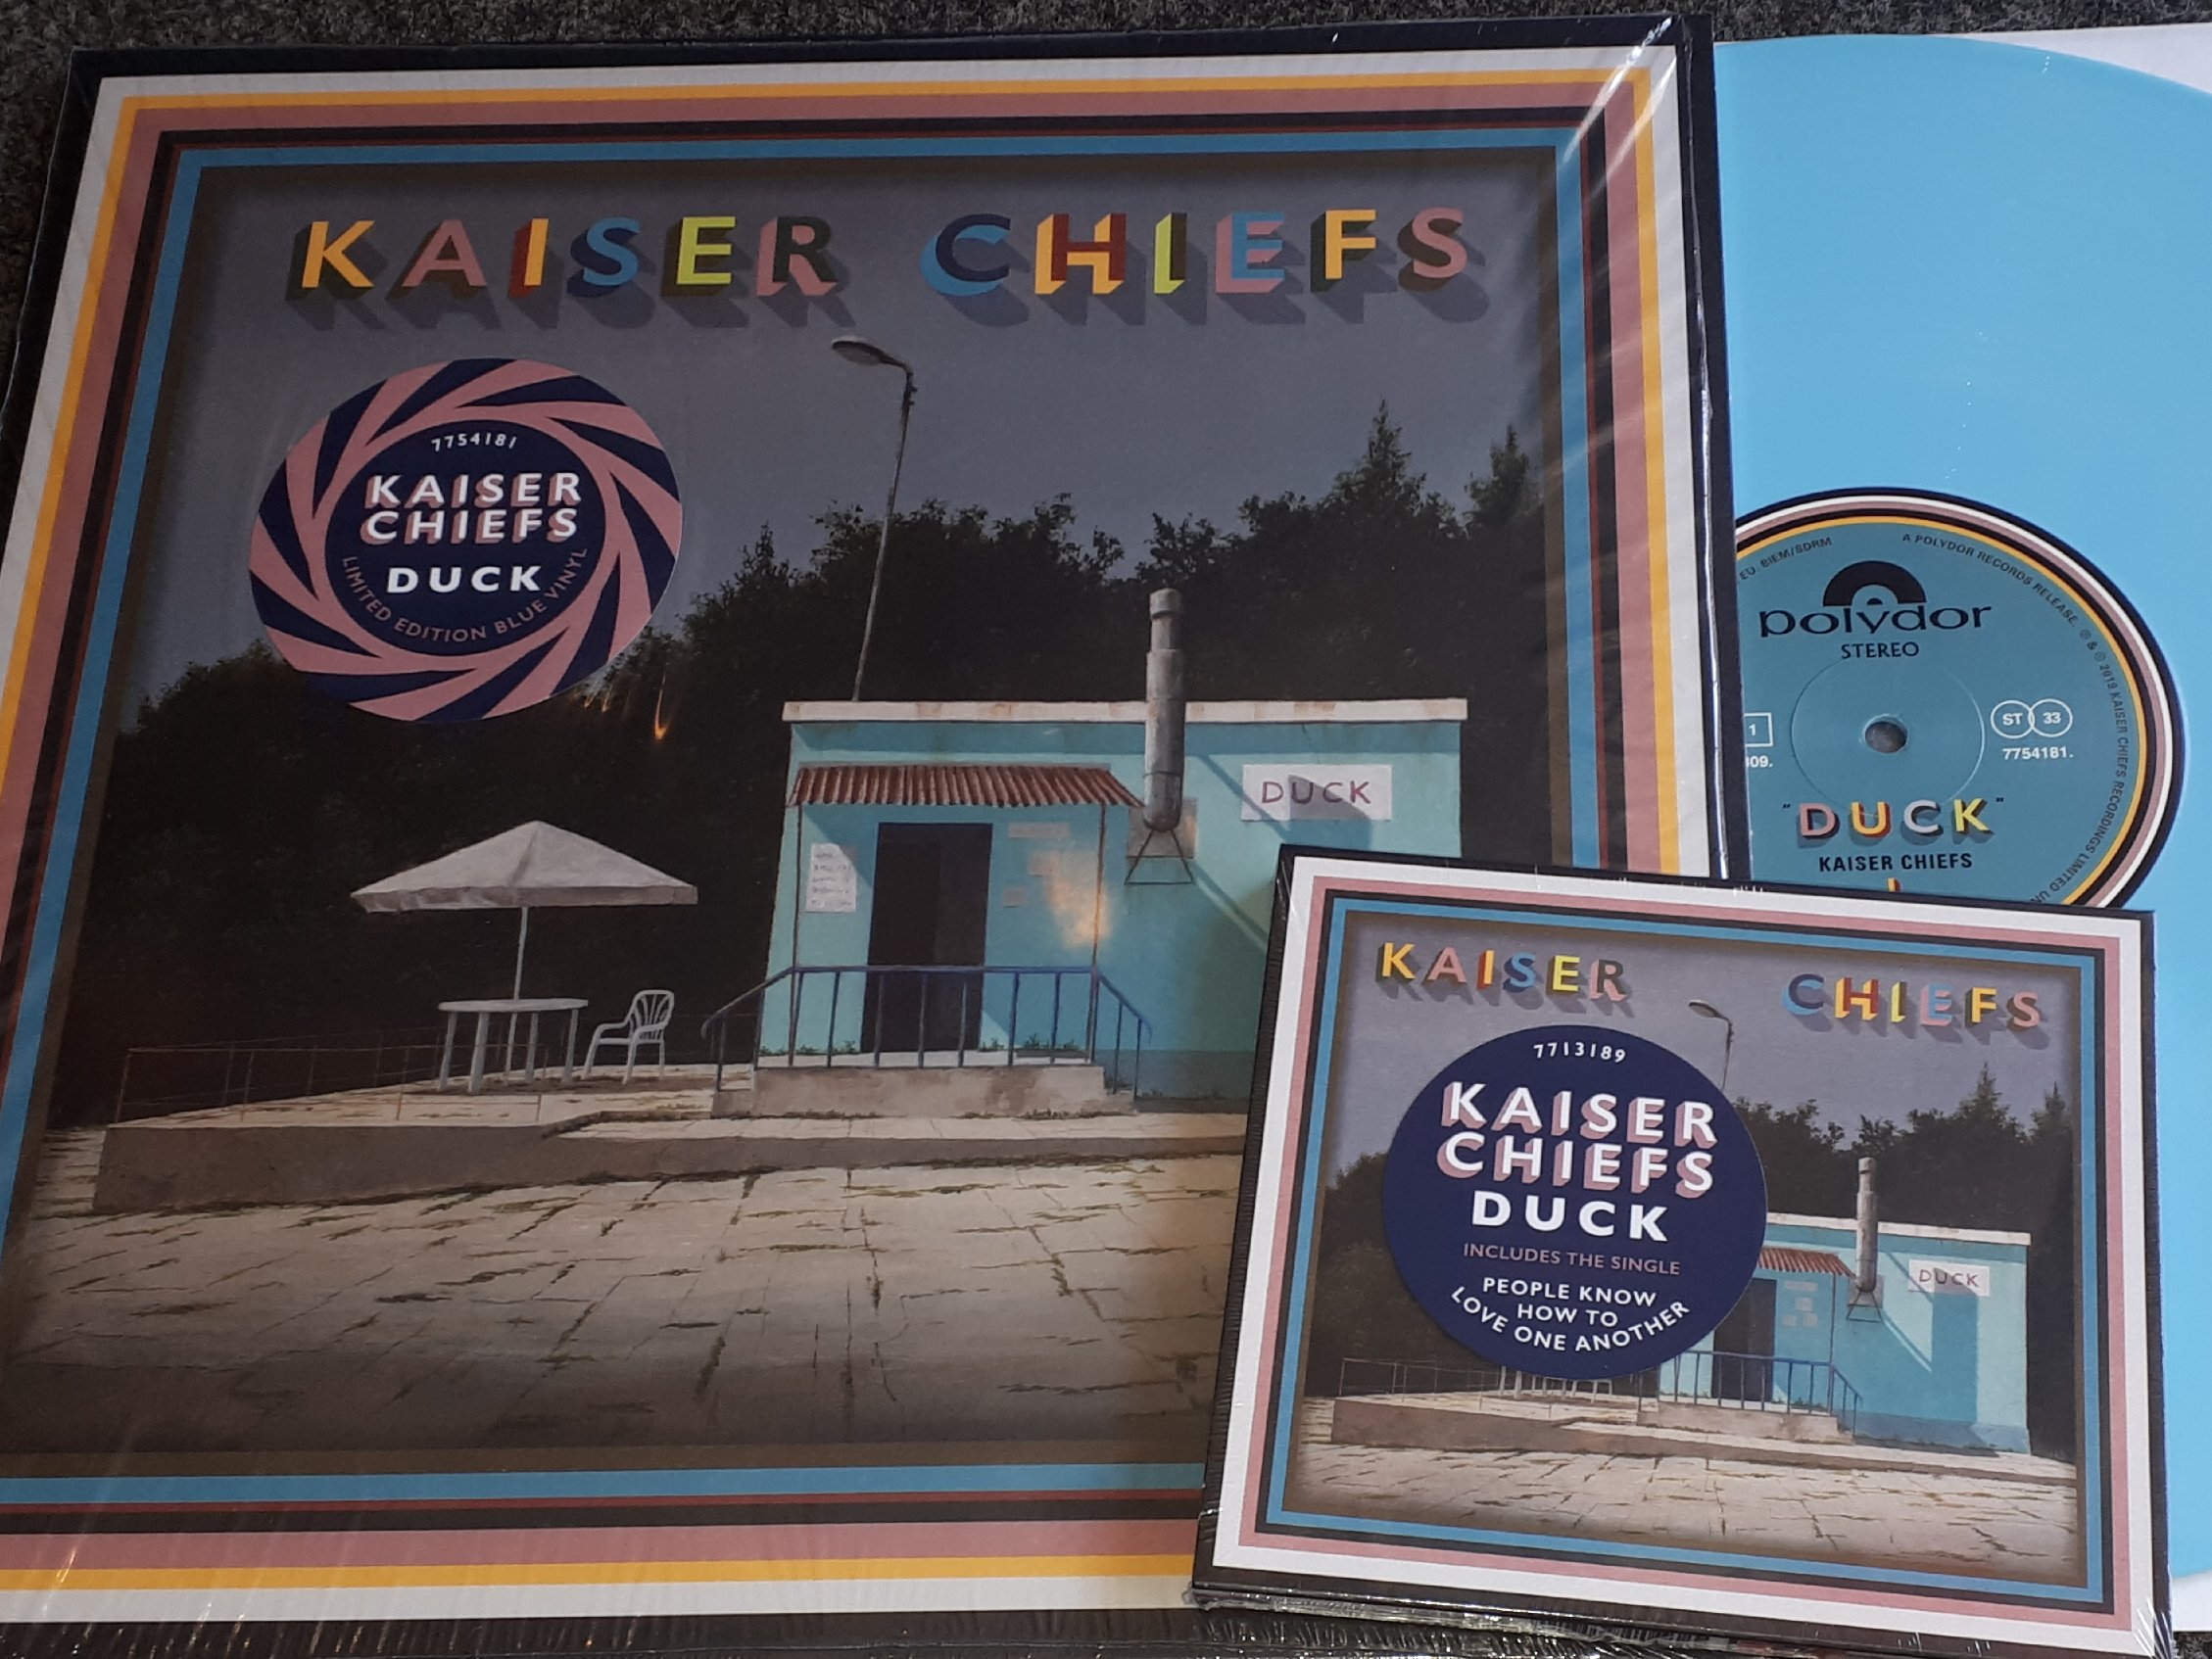 Andy Hibberd on "The new @KaiserChiefs album Duck 🦆 will be by this Friday 26th July. It's available on CD and limited edition duck egg blue vinyl with